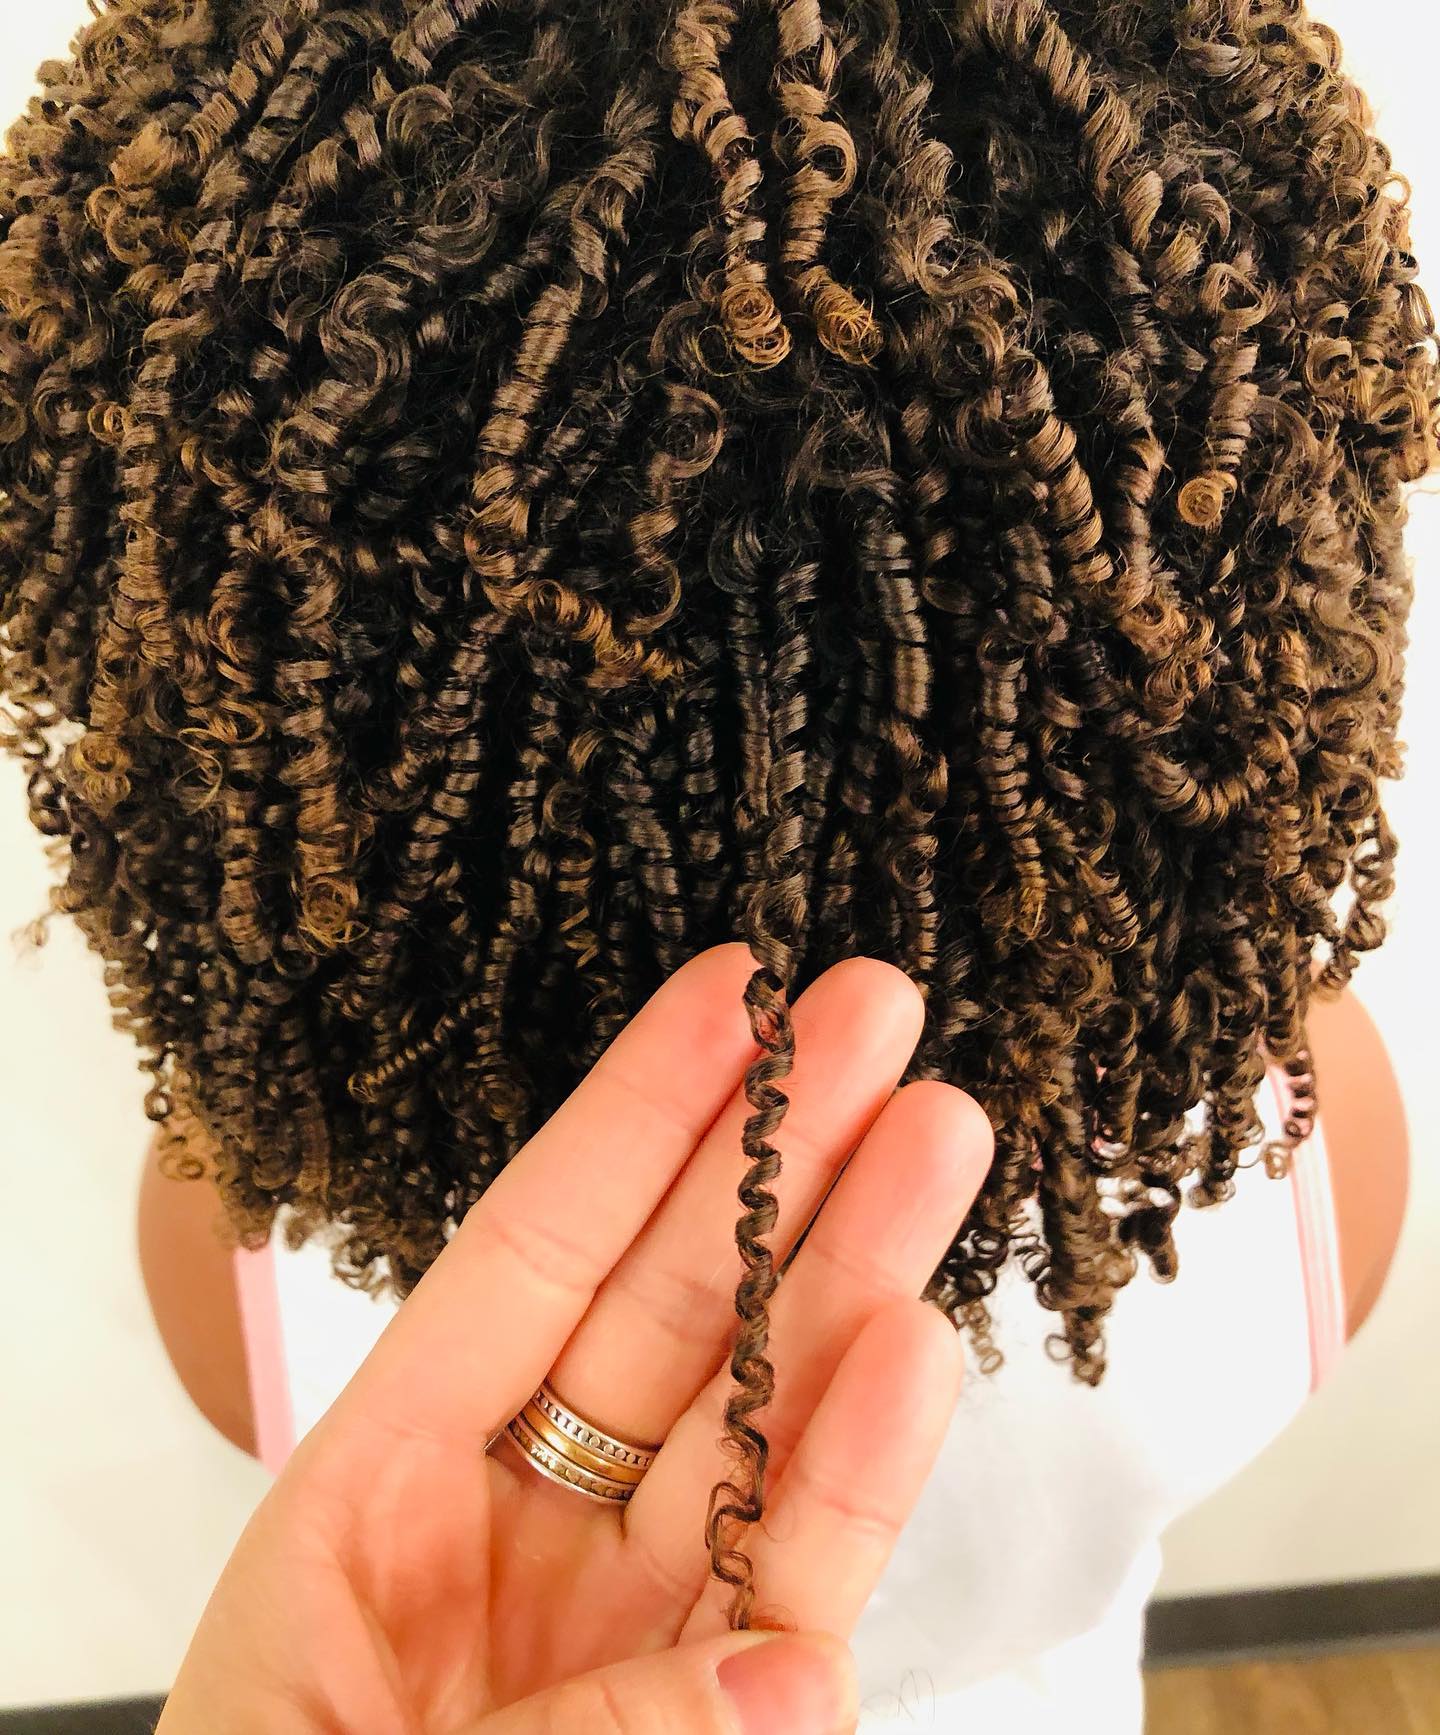 Why Does My Hair Curl at the End? (6 Reasons Why & What To Do) - Abelle